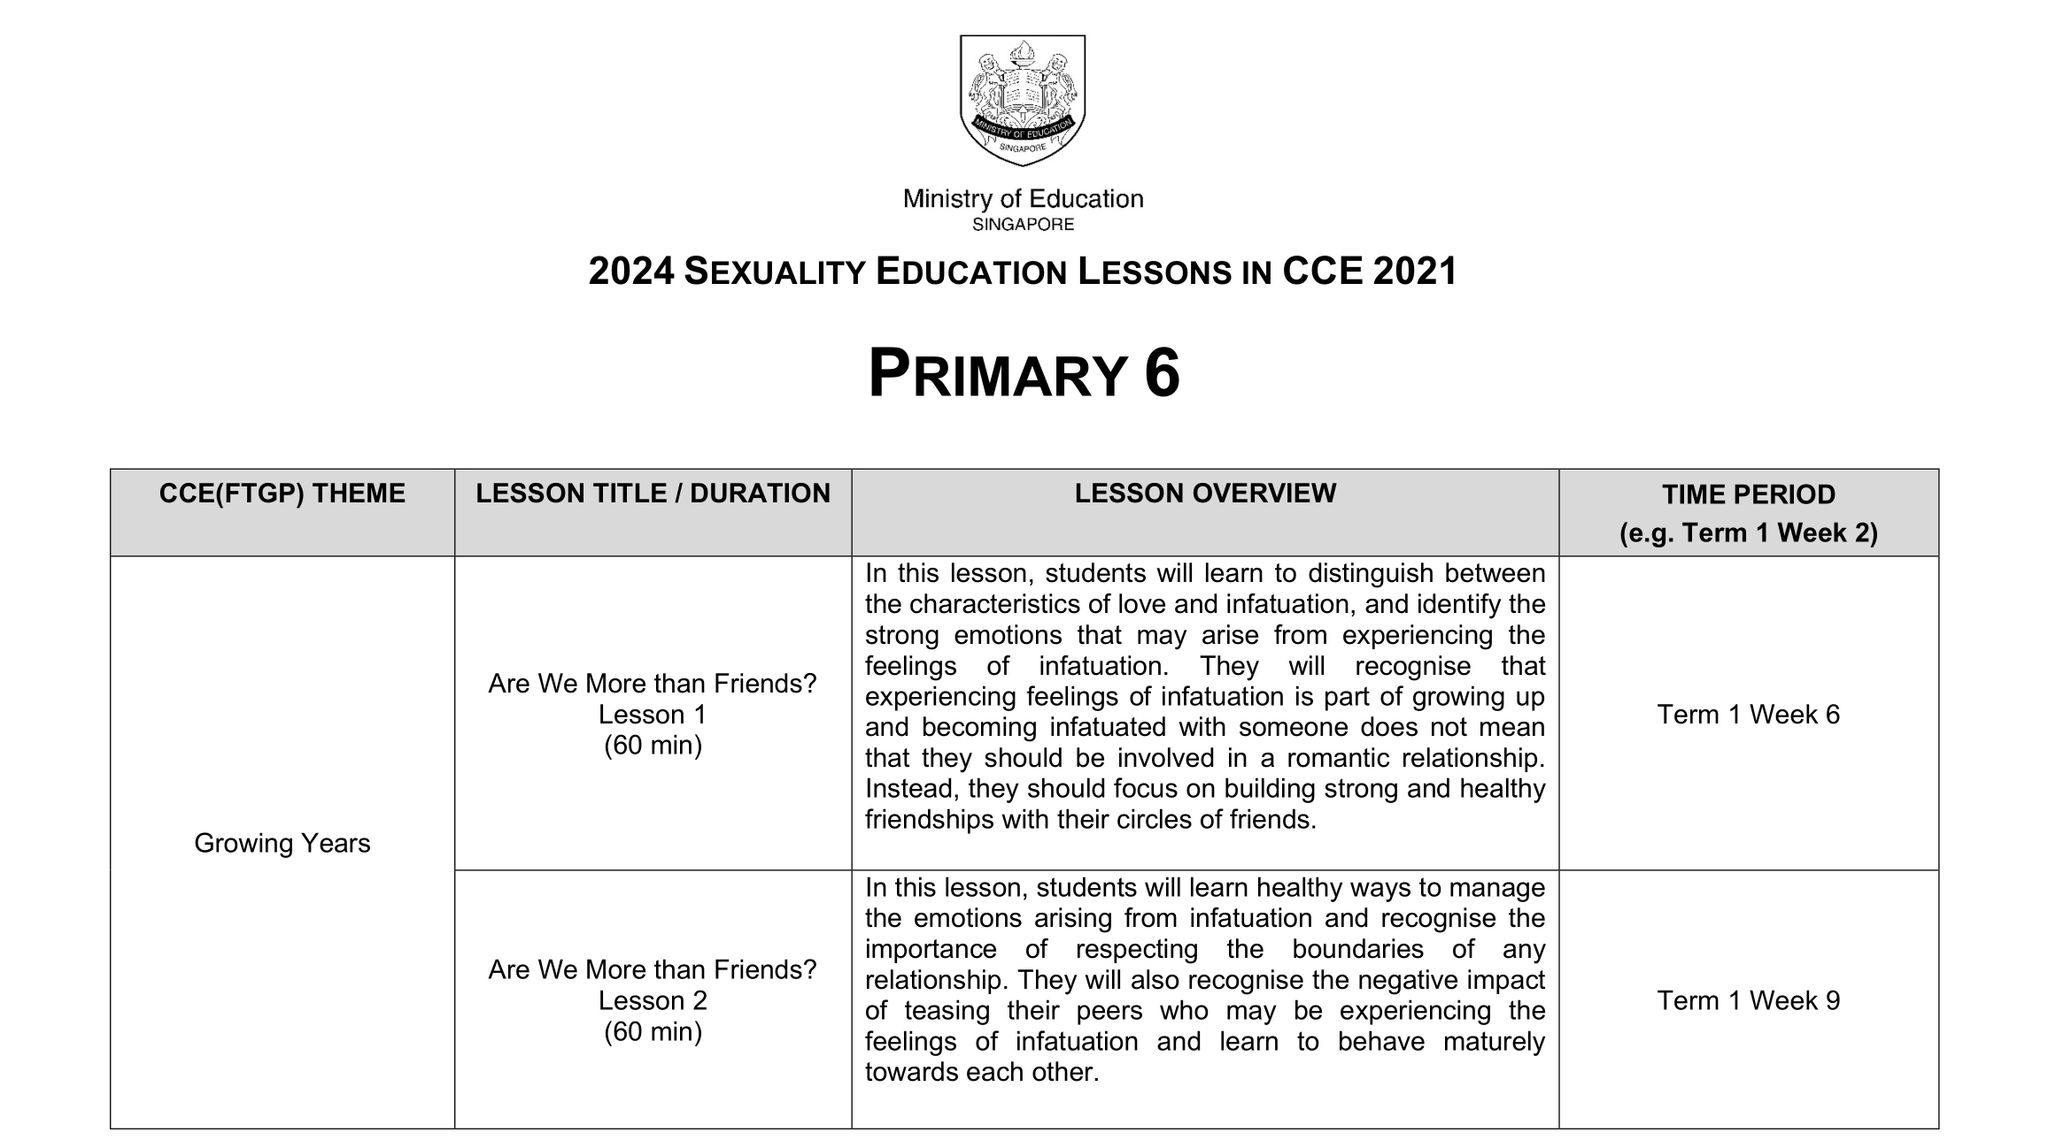 Primary 6 CCE Lessons 2024